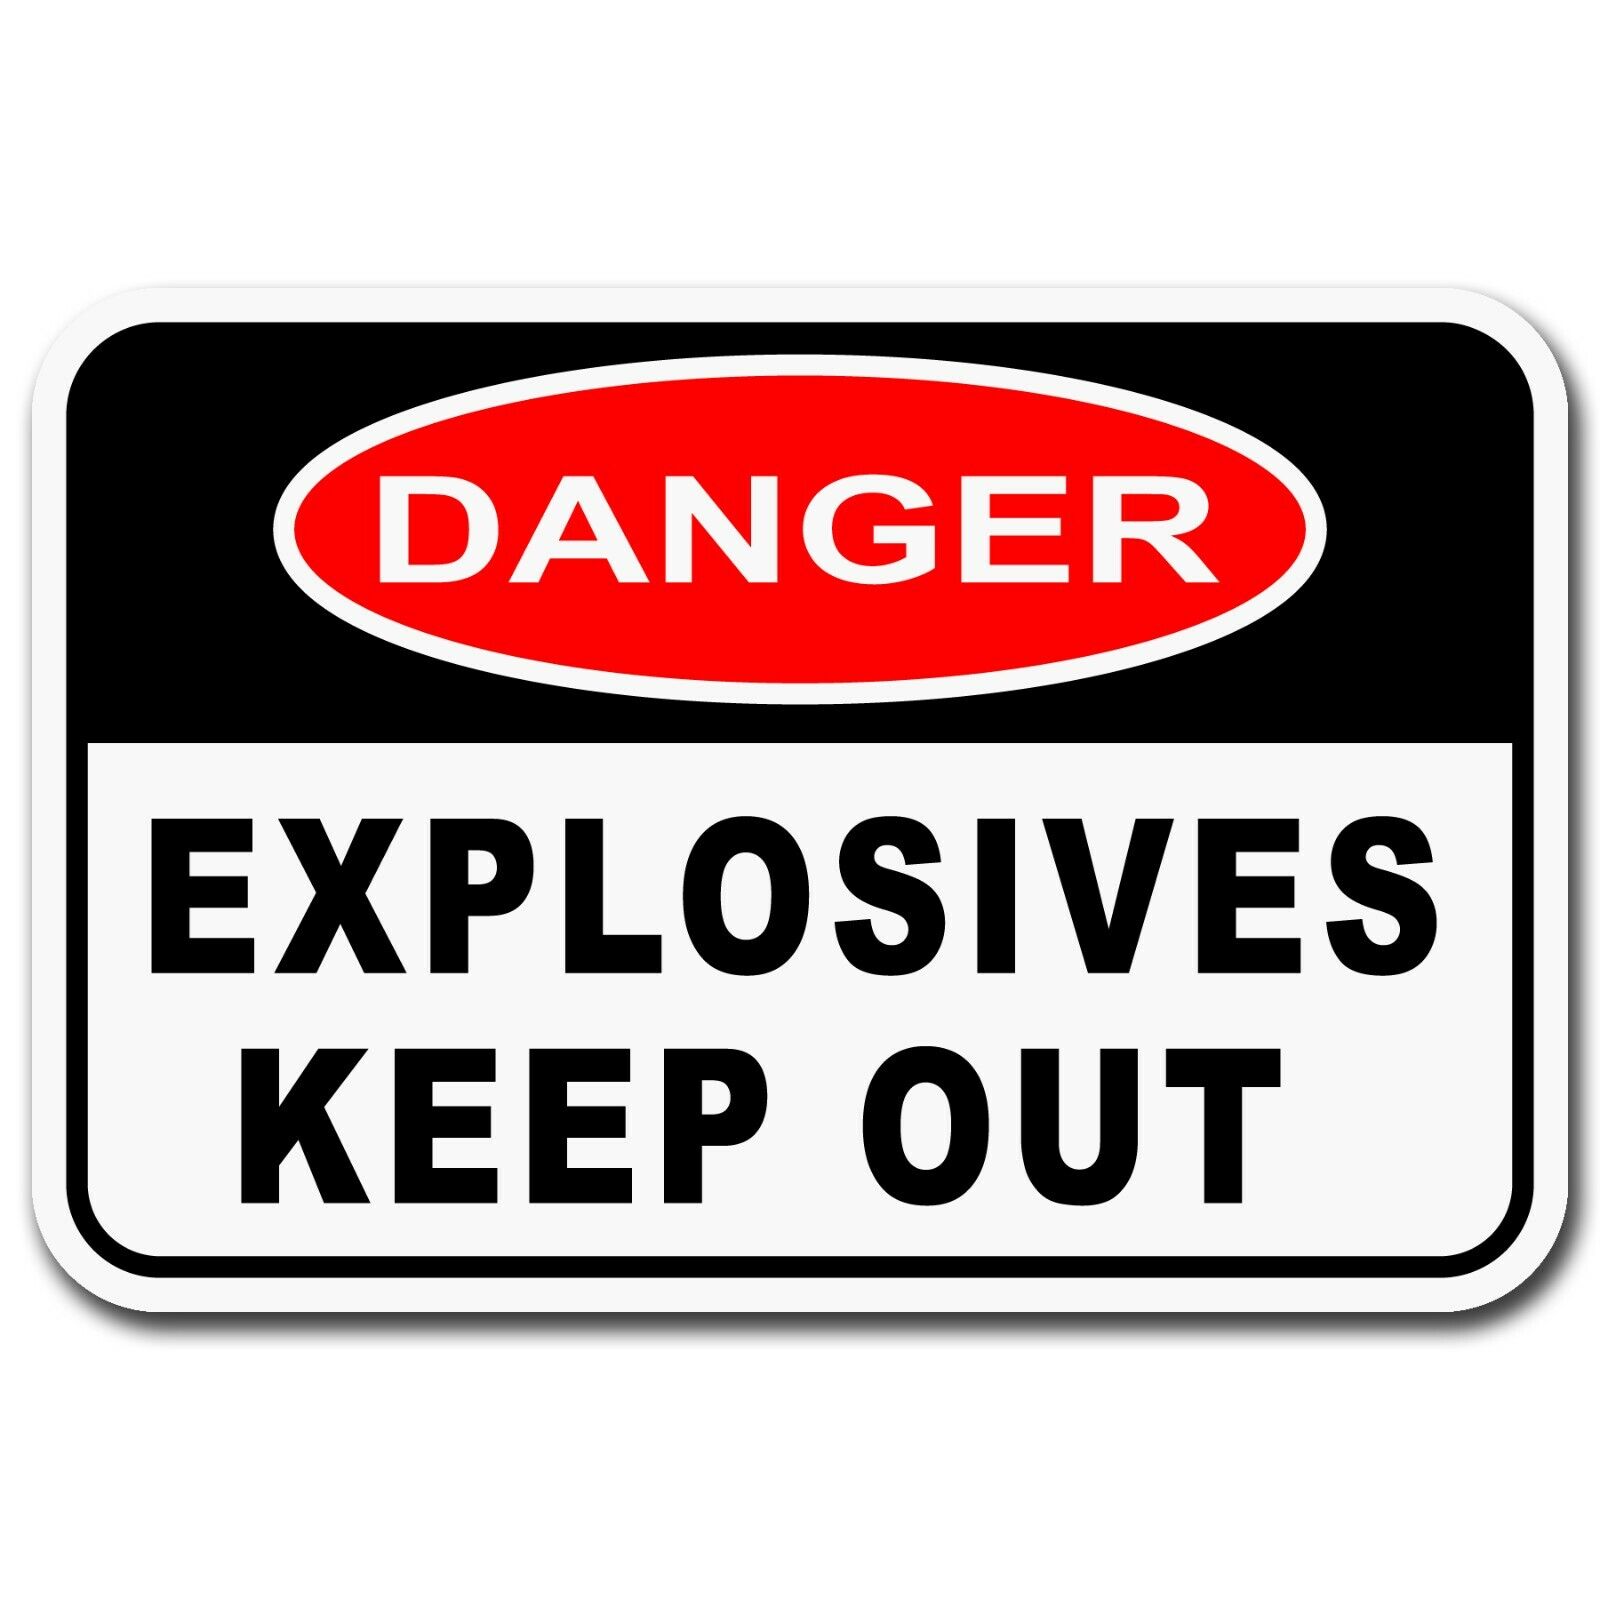 Danger Explosives Keep Out - Workplace, Safety, Warning - Alumin